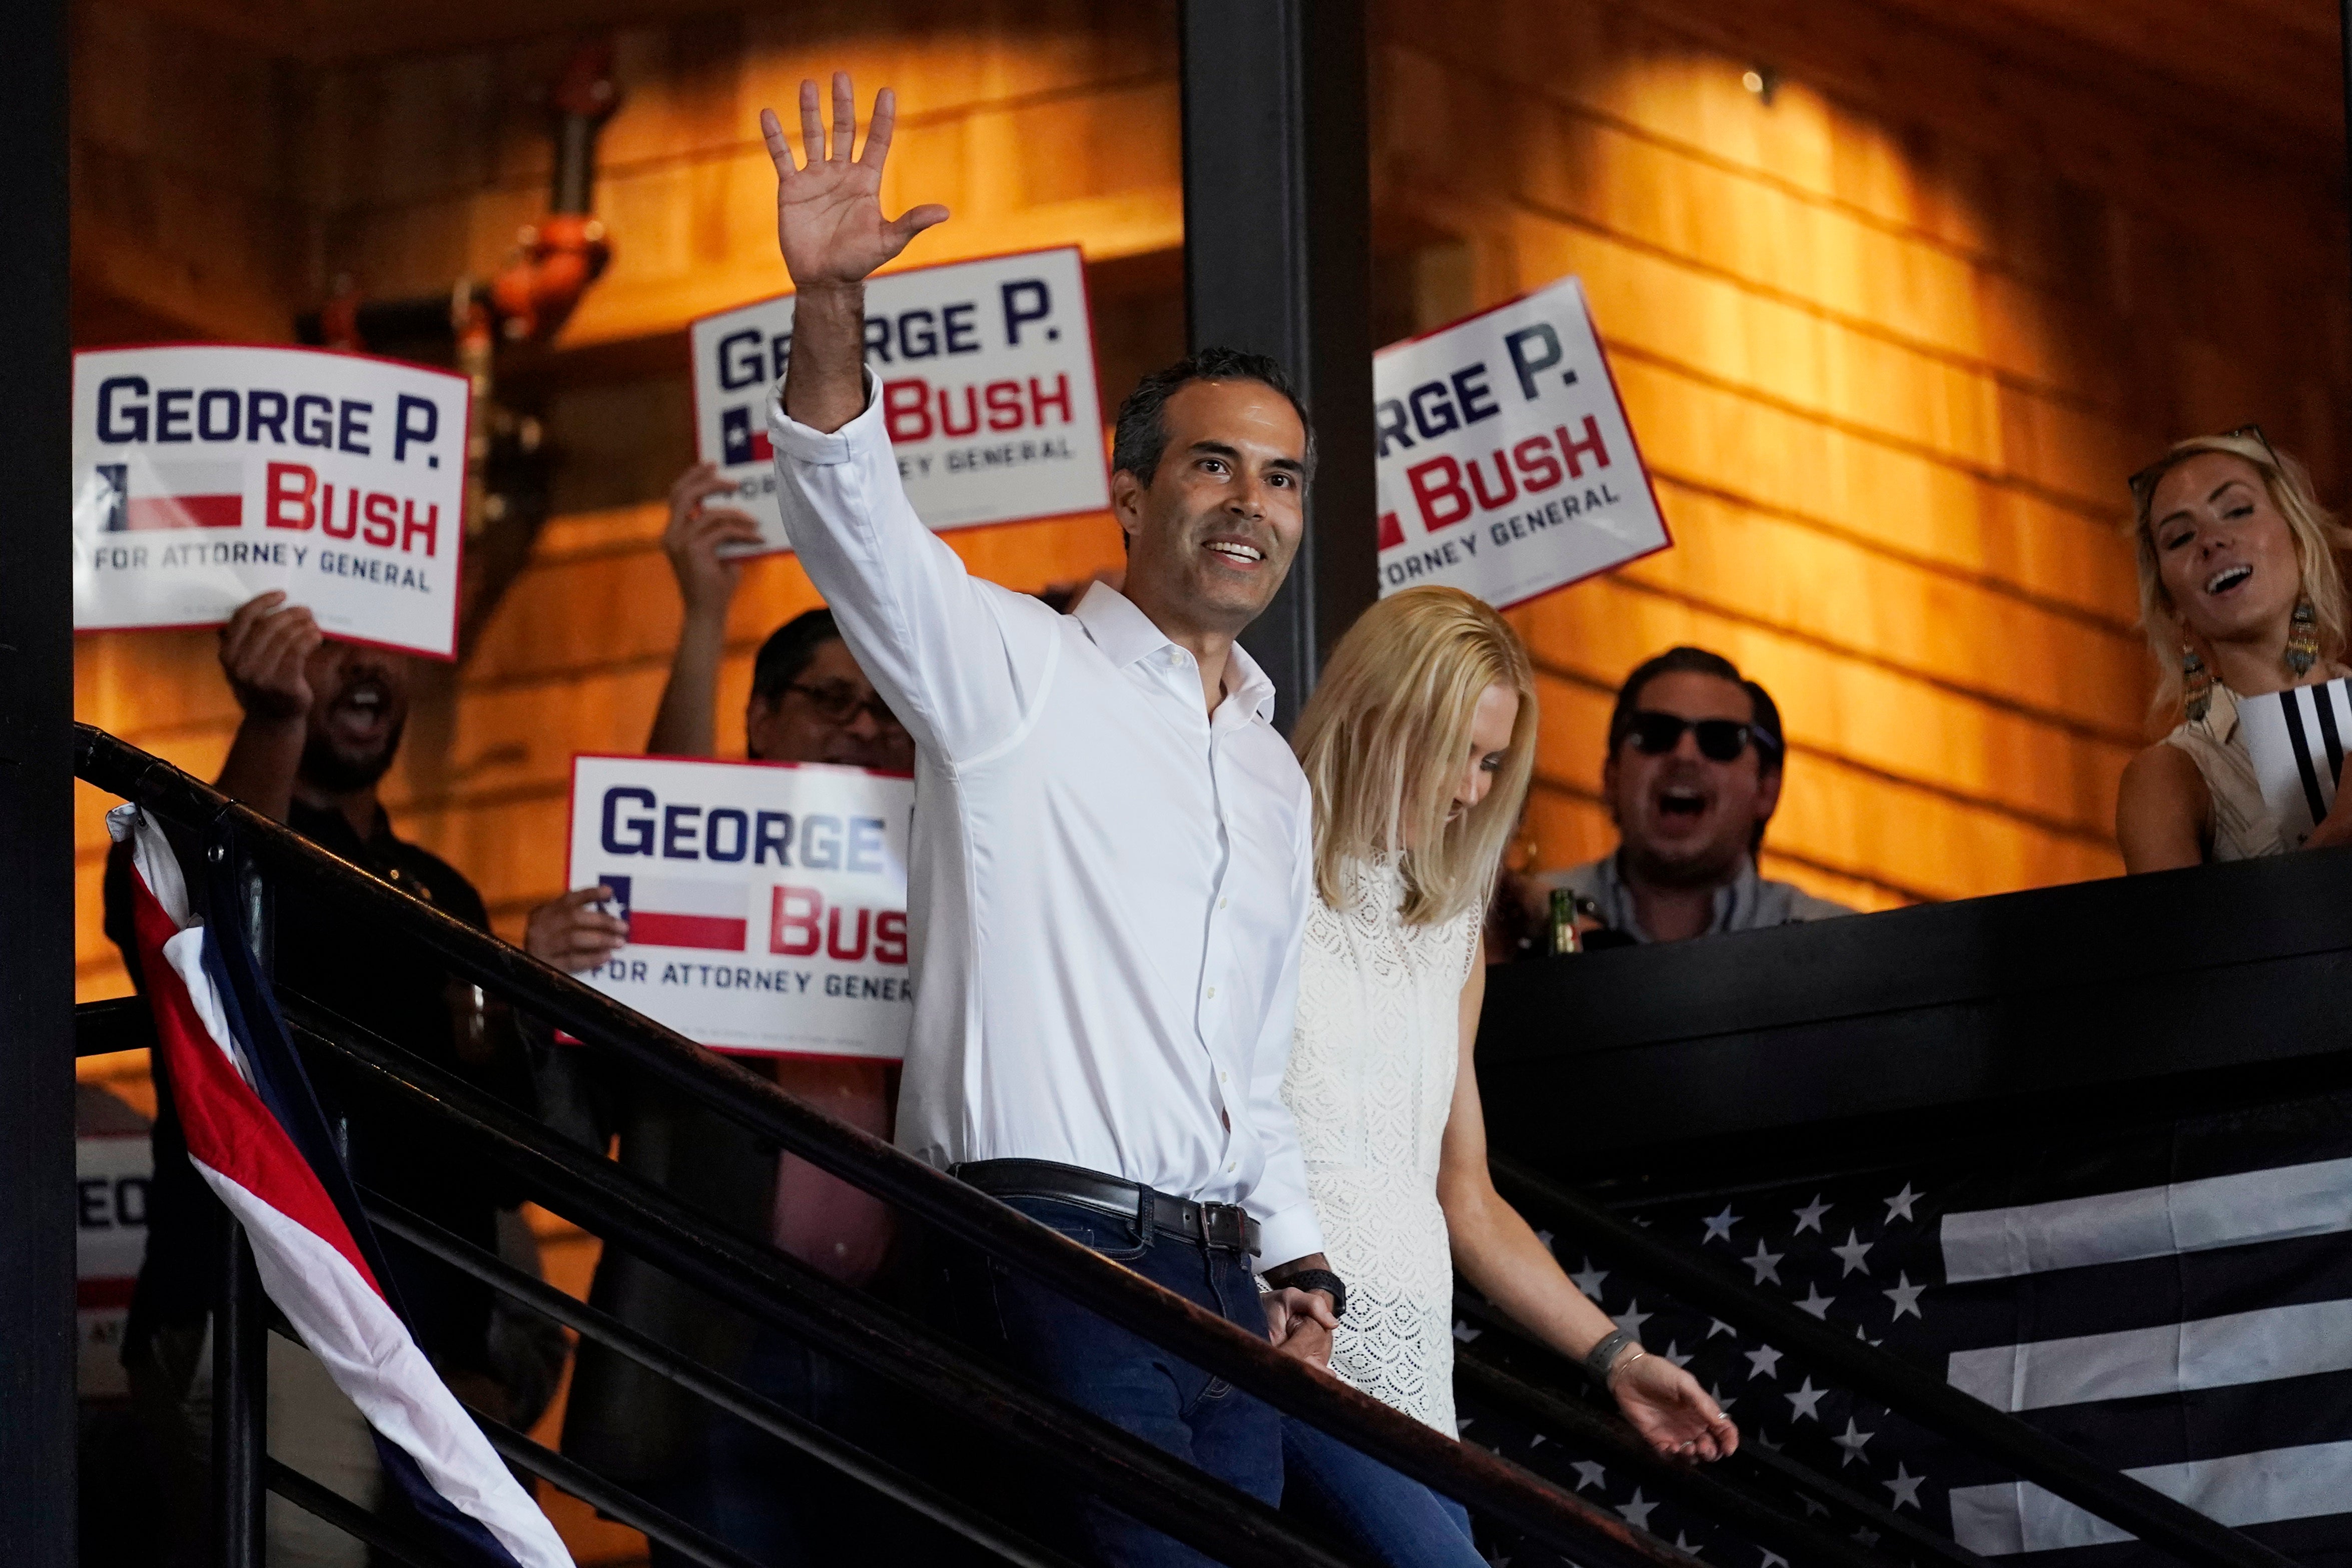 Texas Land Commissioner George P. Bush at a campaign rally.